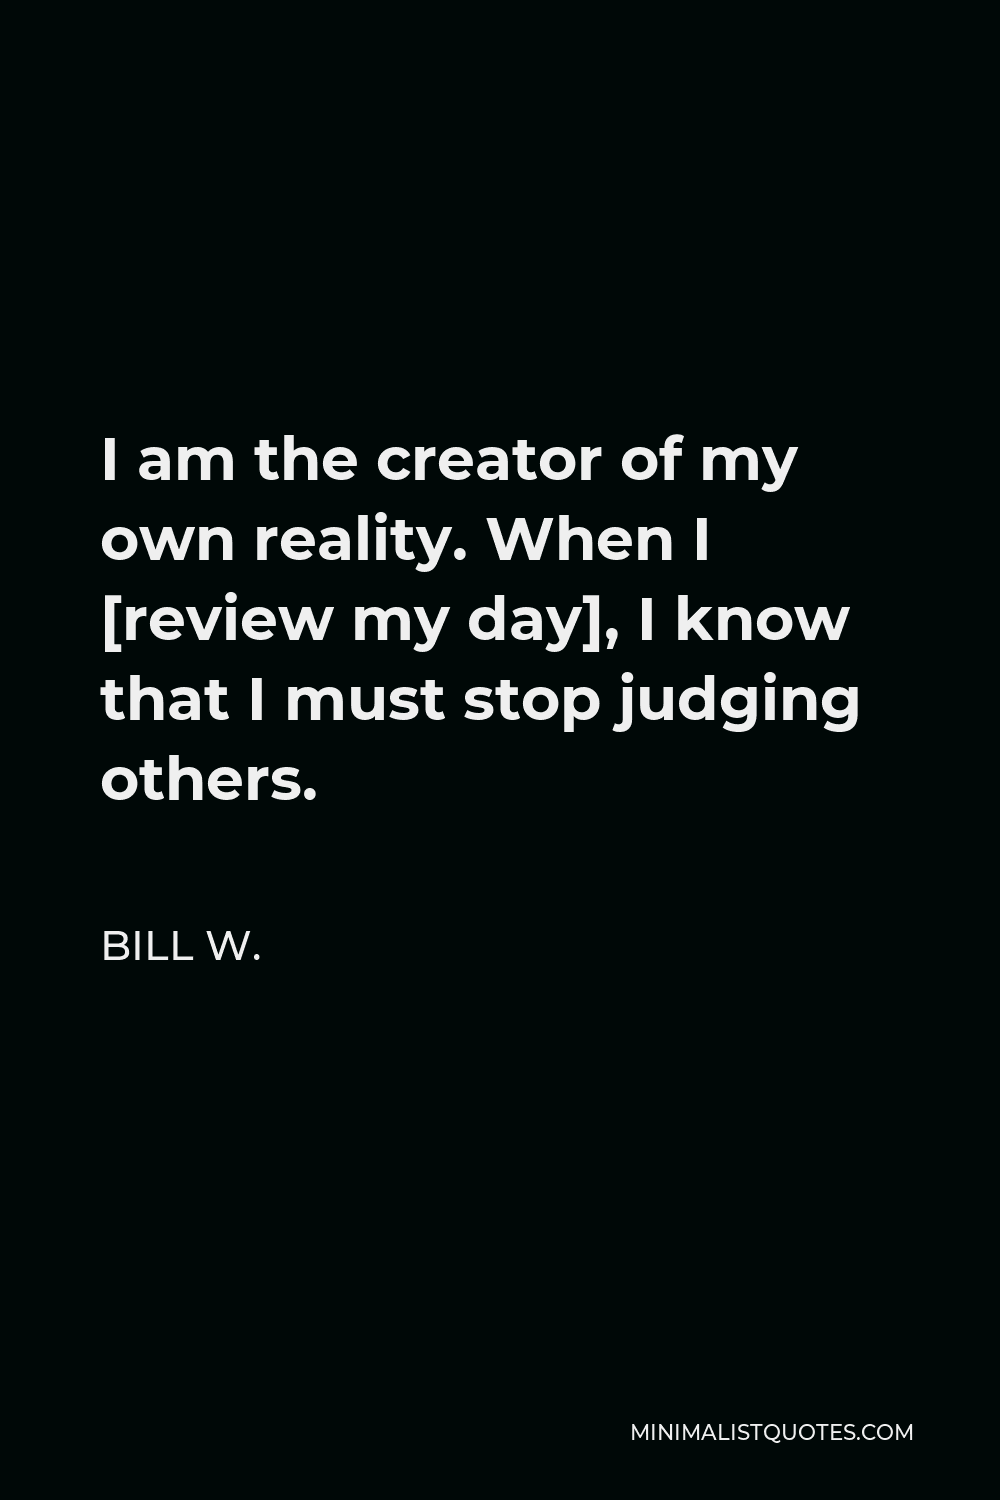 Bill W. Quote - I am the creator of my own reality. When I [review my day], I know that I must stop judging others.